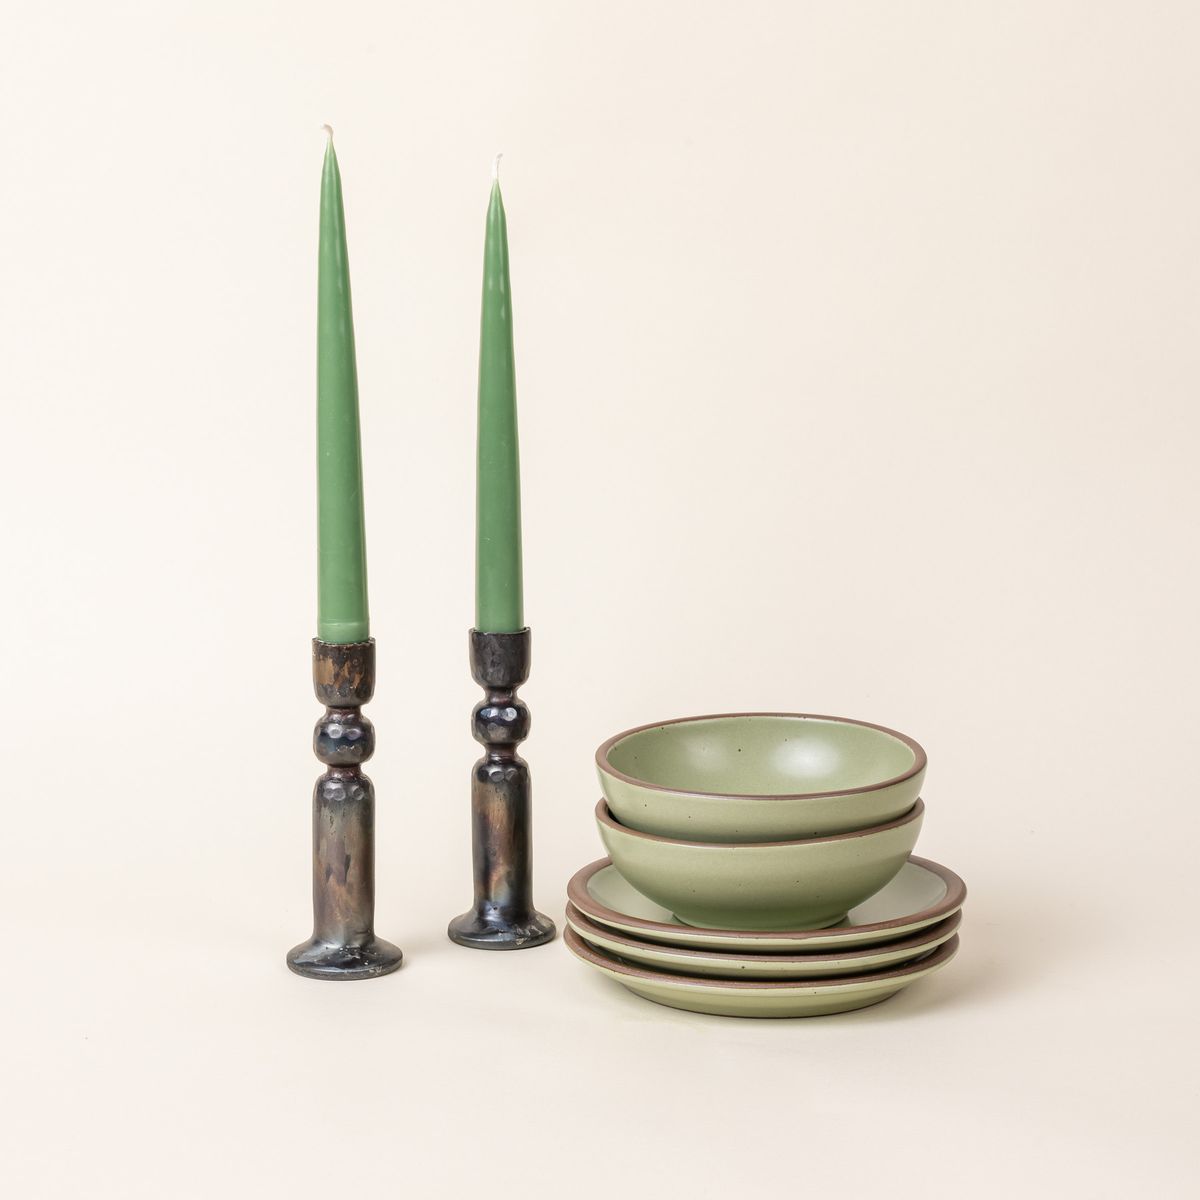 A pair of green taper candles sitting in iron candlestick holders, next to a small stack of sage green bowls and plates.